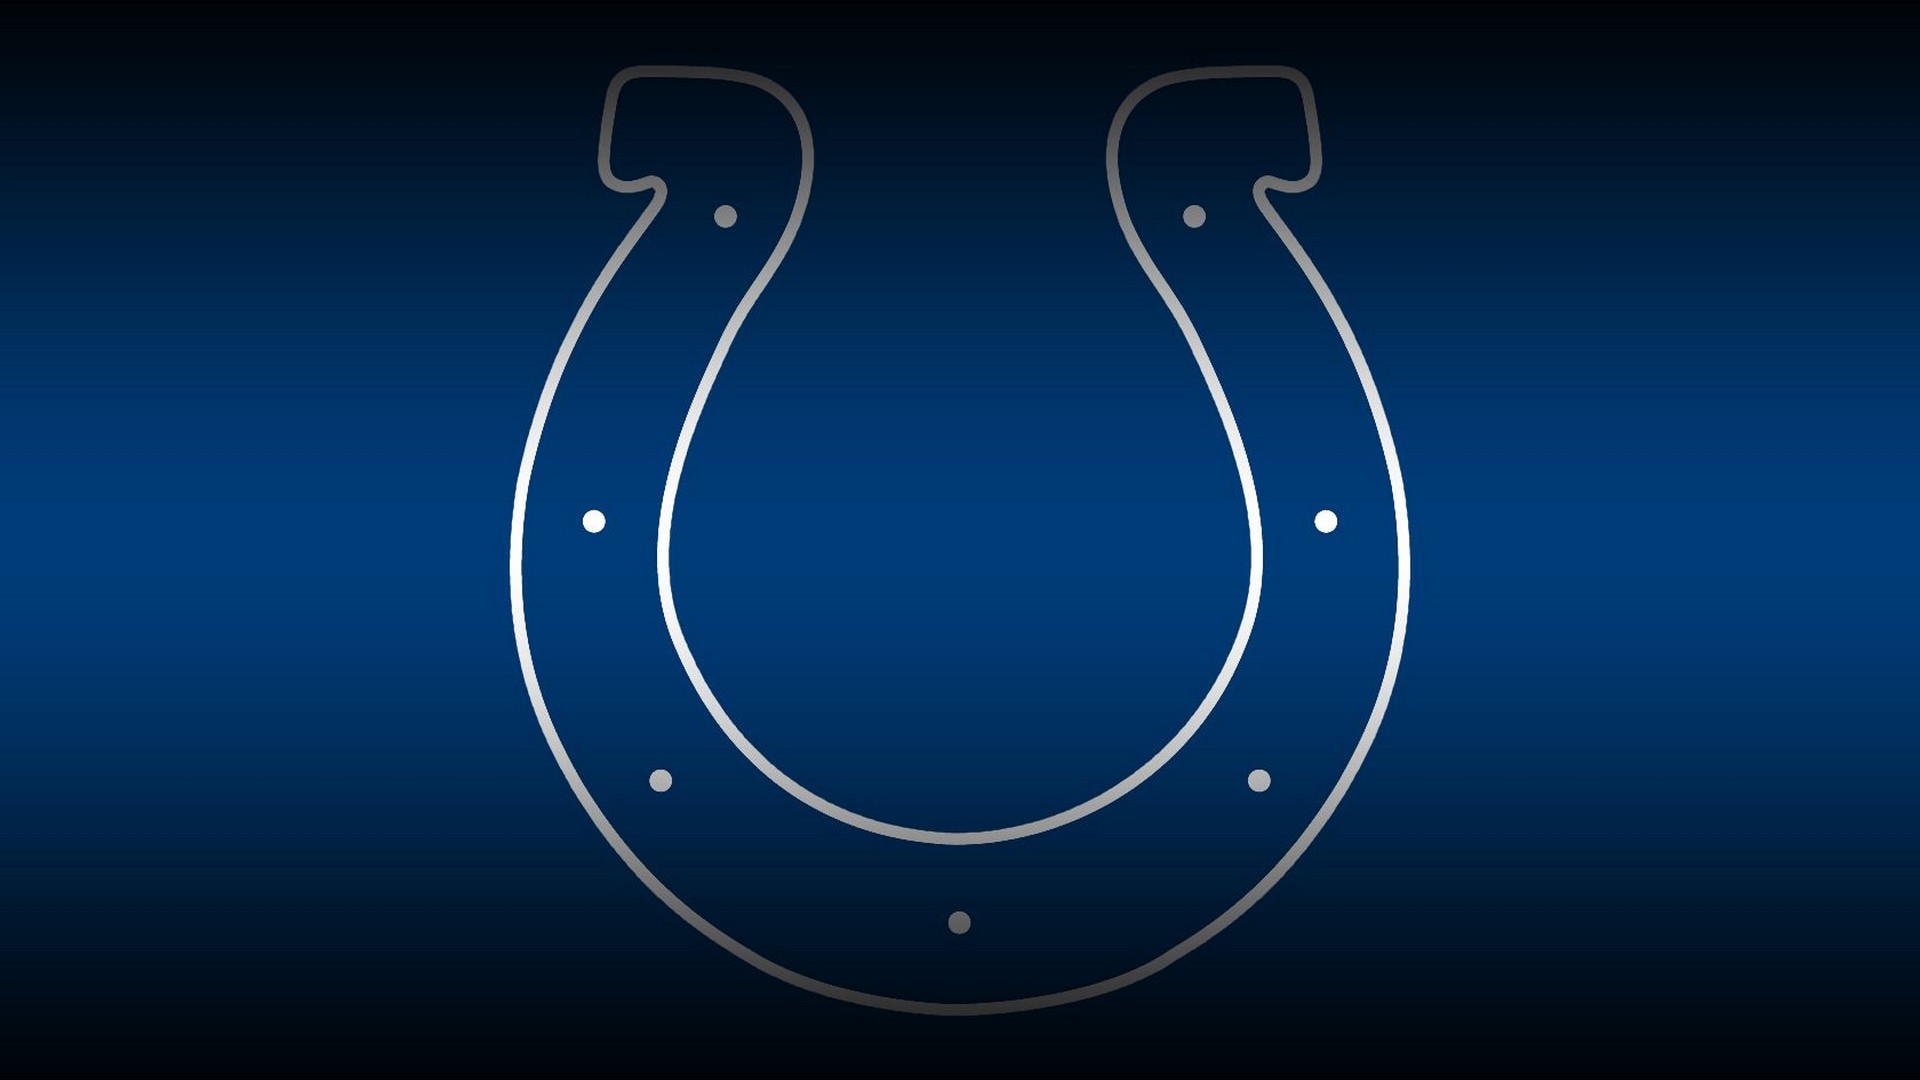 Indianapolis Colts NFL Wallpaper For Mac Backgrounds with resolution 1920x1080 pixel. You can make this wallpaper for your Mac or Windows Desktop Background, iPhone, Android or Tablet and another Smartphone device